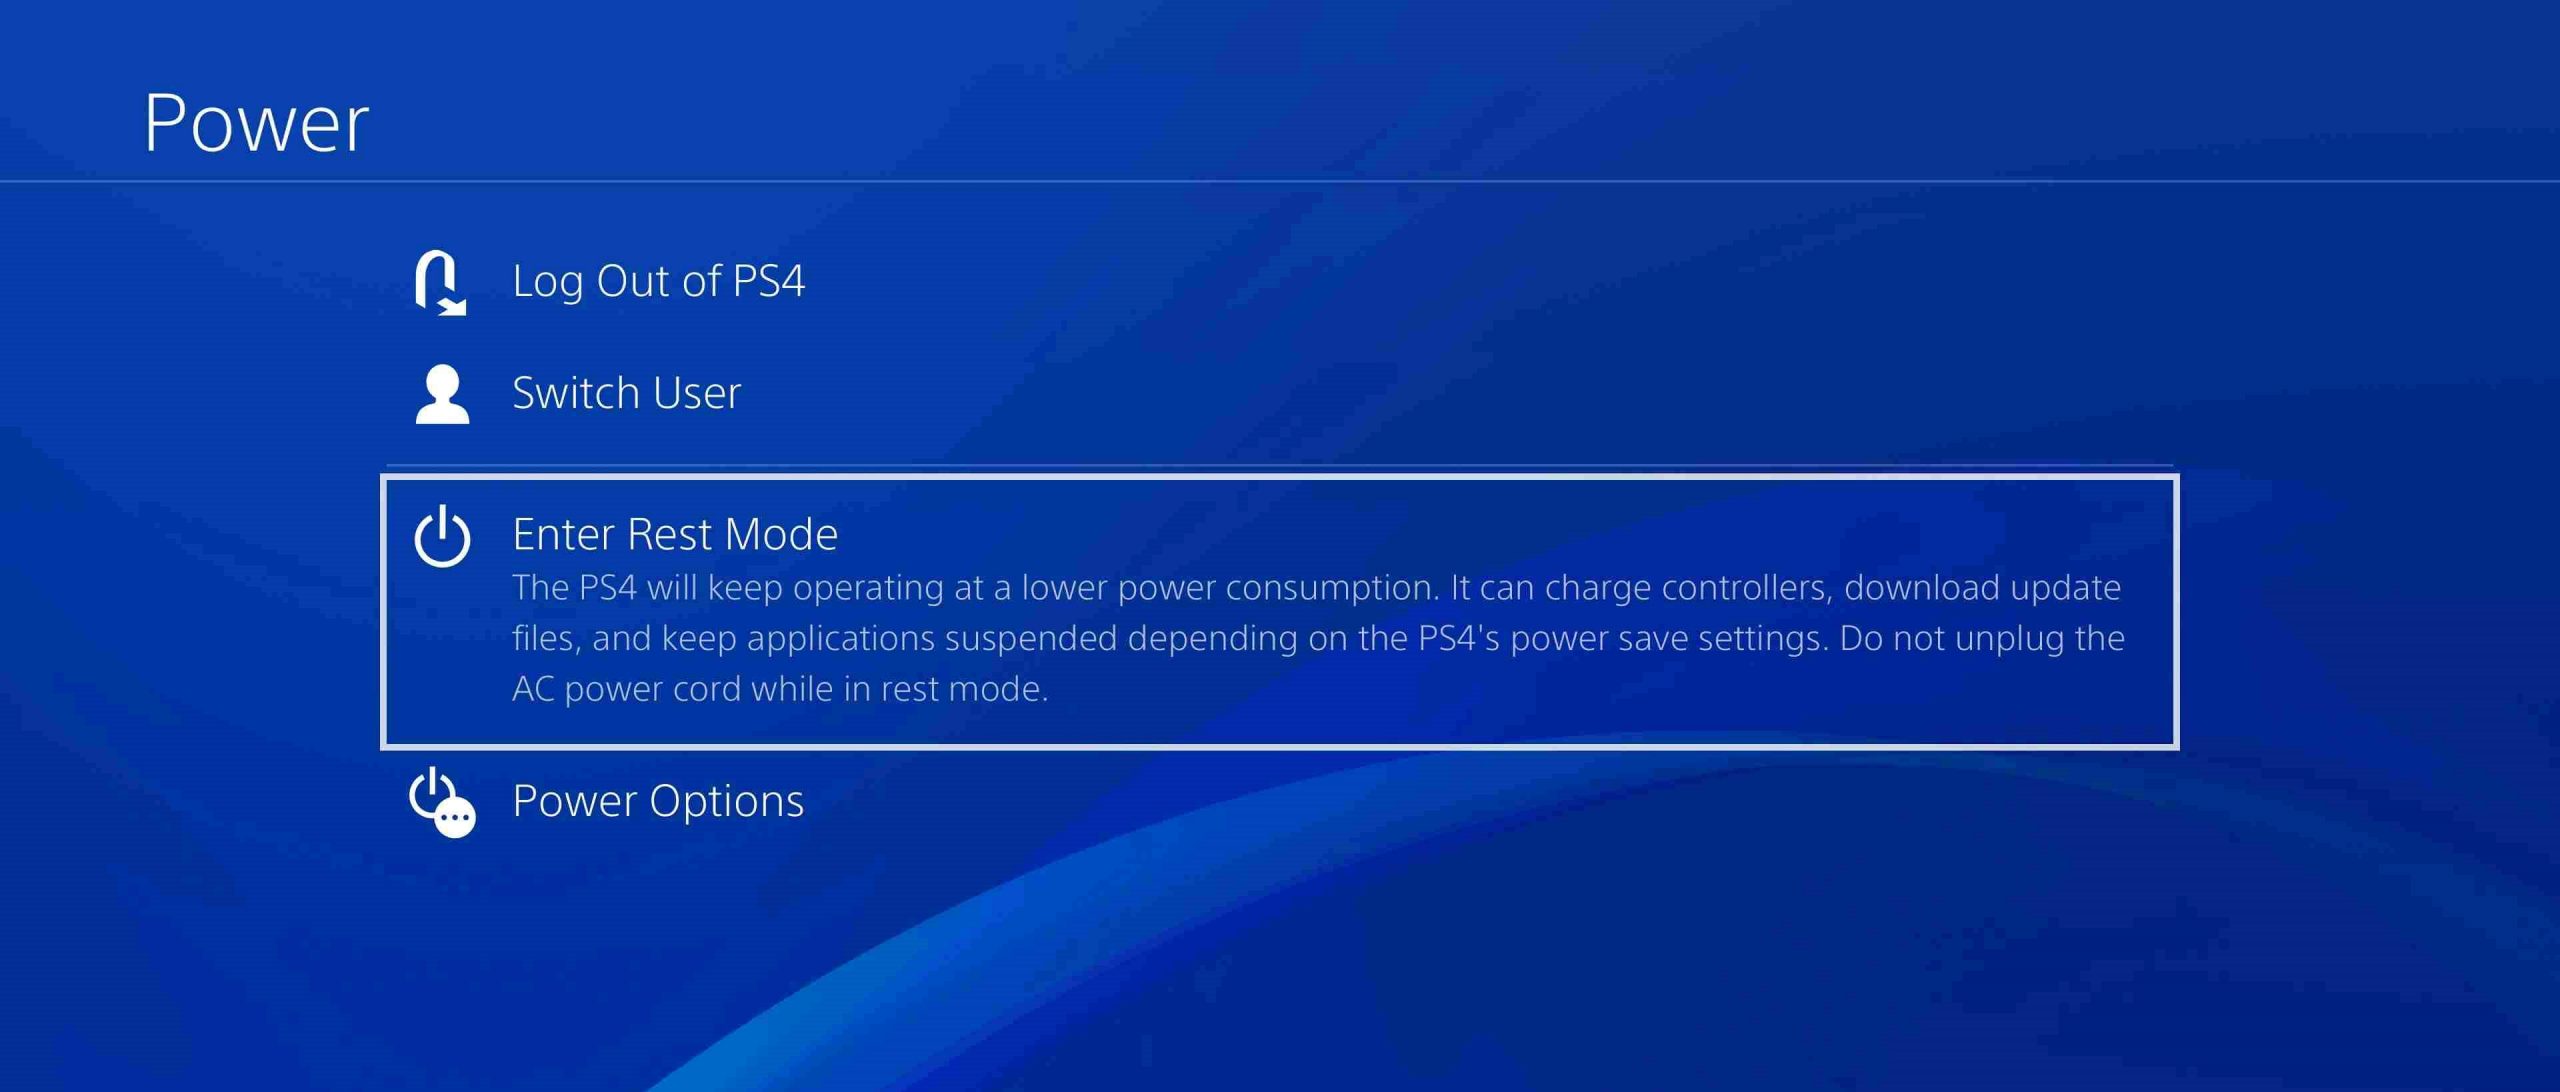 Choose Power options to turn off PS4